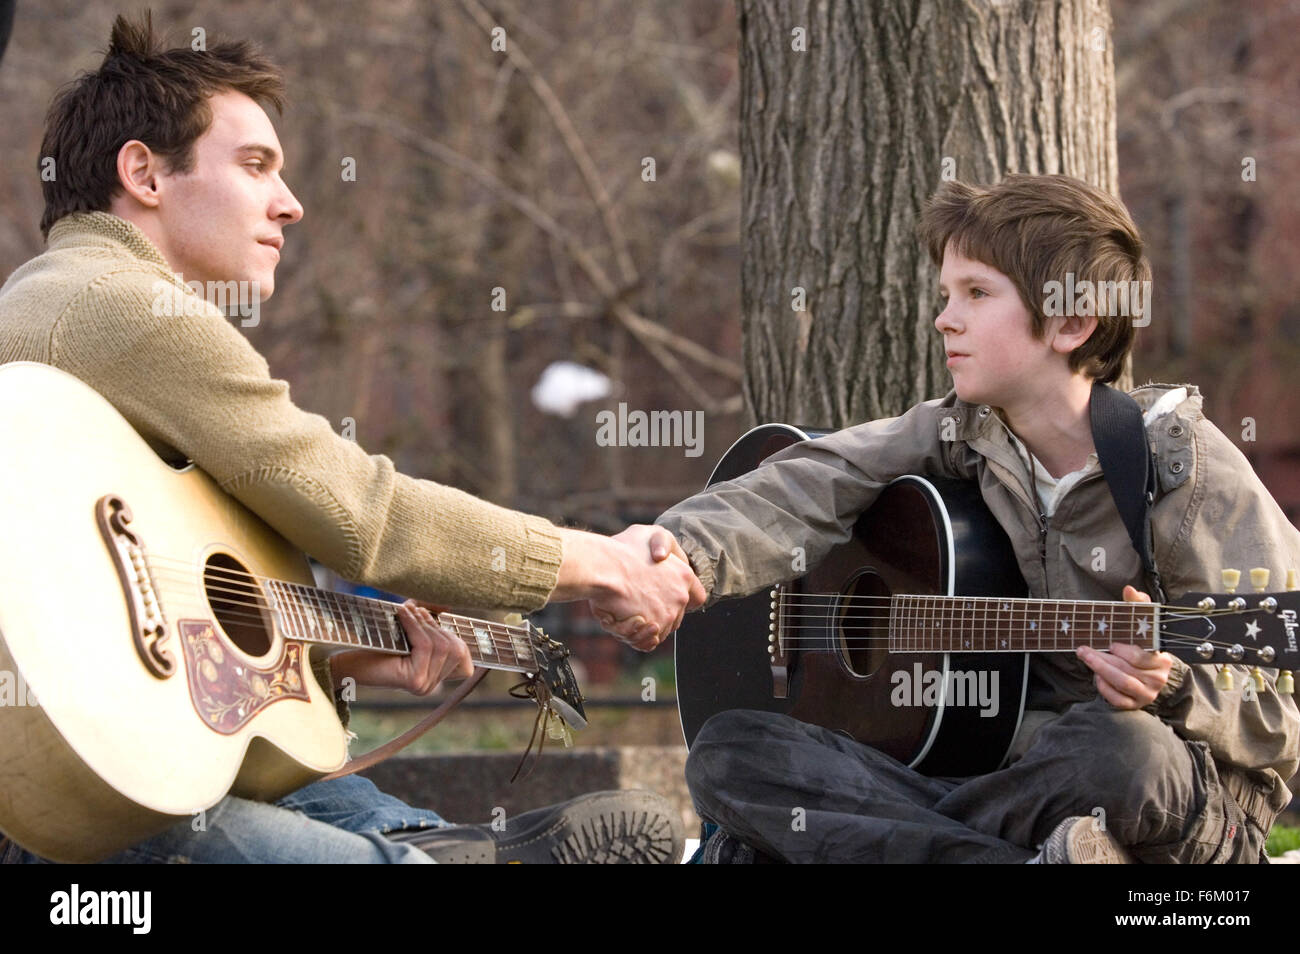 RELEASE DATE: Oct 21, 2007. MOVIE TITLE: August Rush. STUDIO: CJ Entertainment. PLOT: The story of a charismatic young Irish guitarist and a sheltered young cellist who have a chance encounter one magical night above New York's Washington Square, but are soon torn apart, leaving in their wake an infant, August Rush, orphaned by circumstance. Now performing on the streets of New York and cared for by a mysterious stranger, August uses his remarkable musical talent to seek the parents from whom he was separated at birth. PICTURED: JONATHAN RHYS MEYERS as Louis Connelly, and FREDDIE HIGHMORE as E Stock Photo